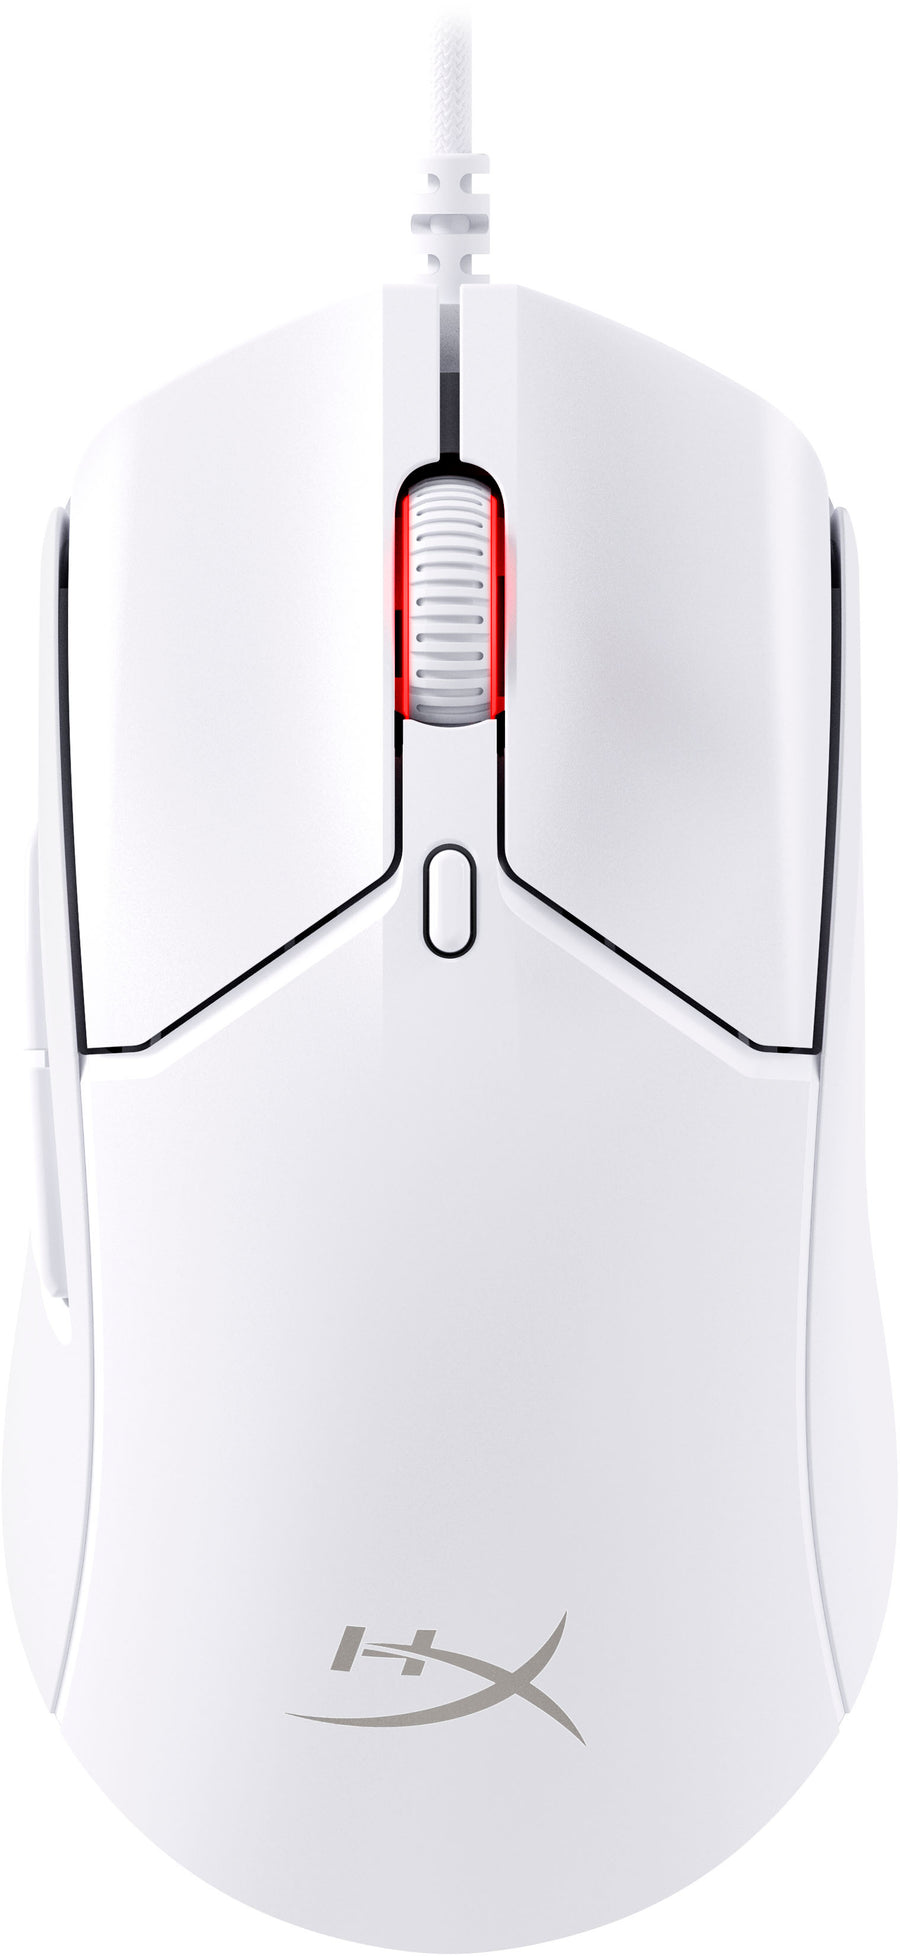 HyperX - Pulsefire Haste 2 Lightweight Wired Optical Gaming Mouse with RGB Lighting - White_0